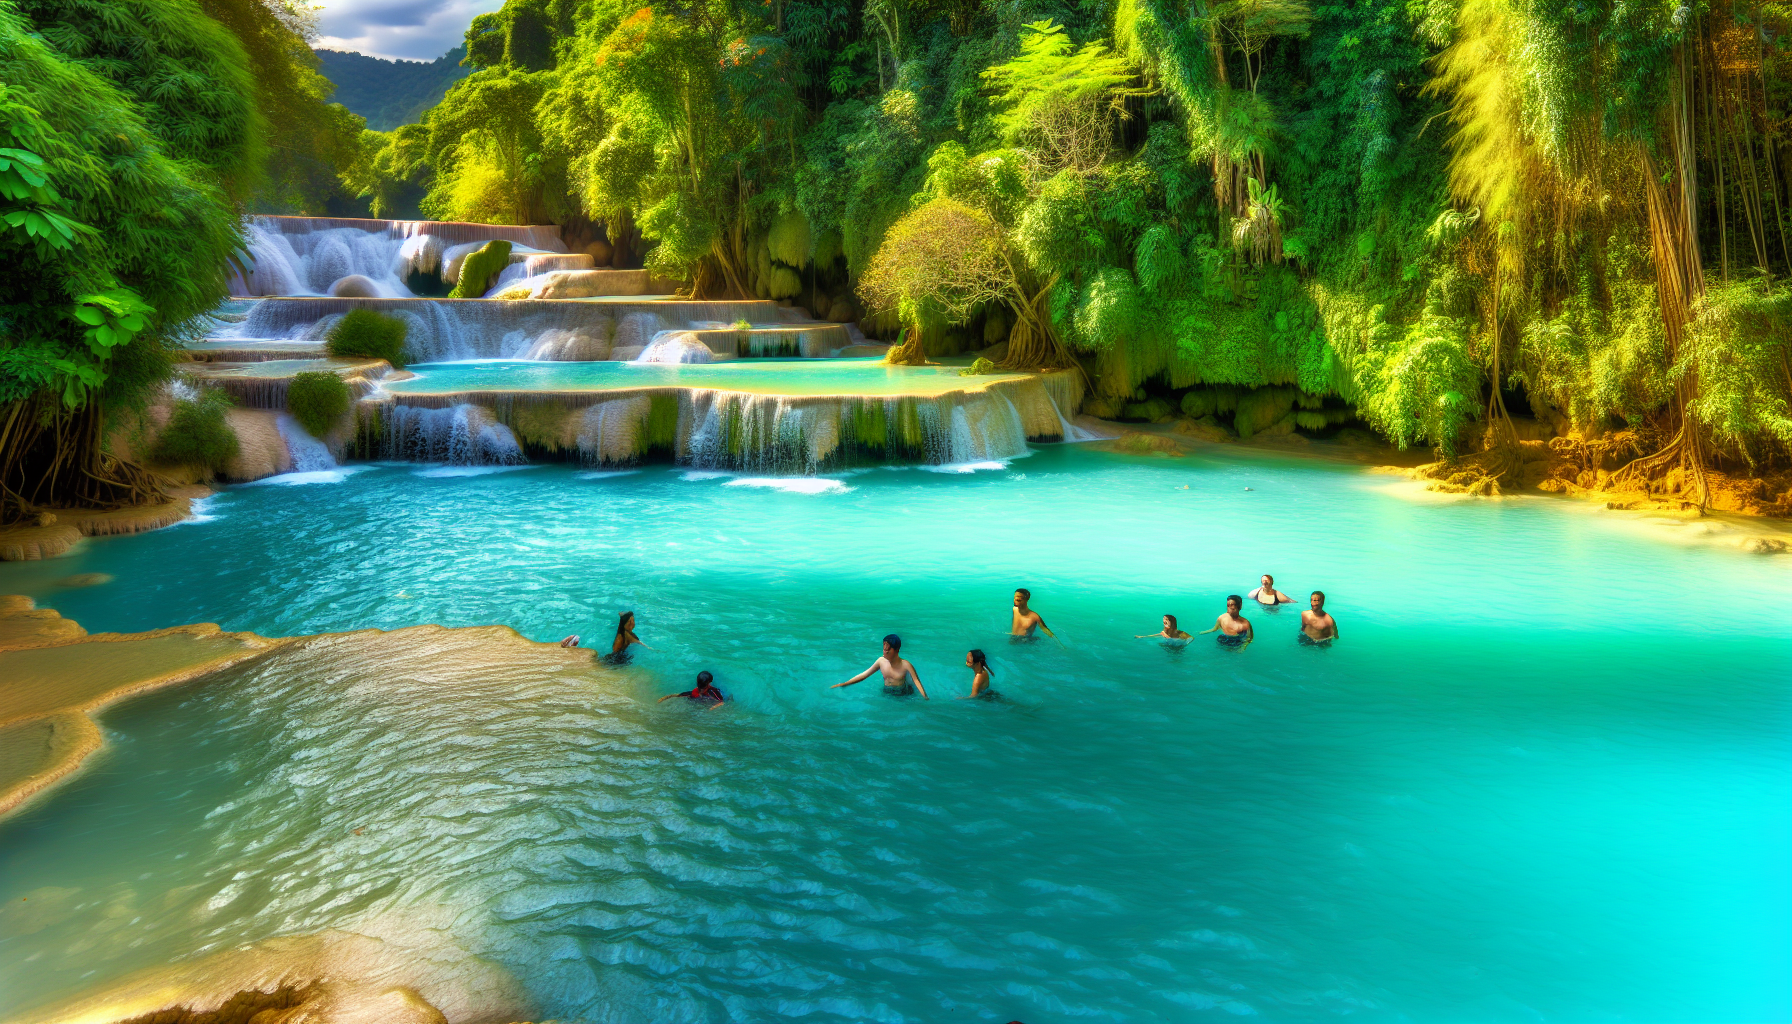 Turquoise pools of Kuang Si Falls in Laos surrounded by lush greenery